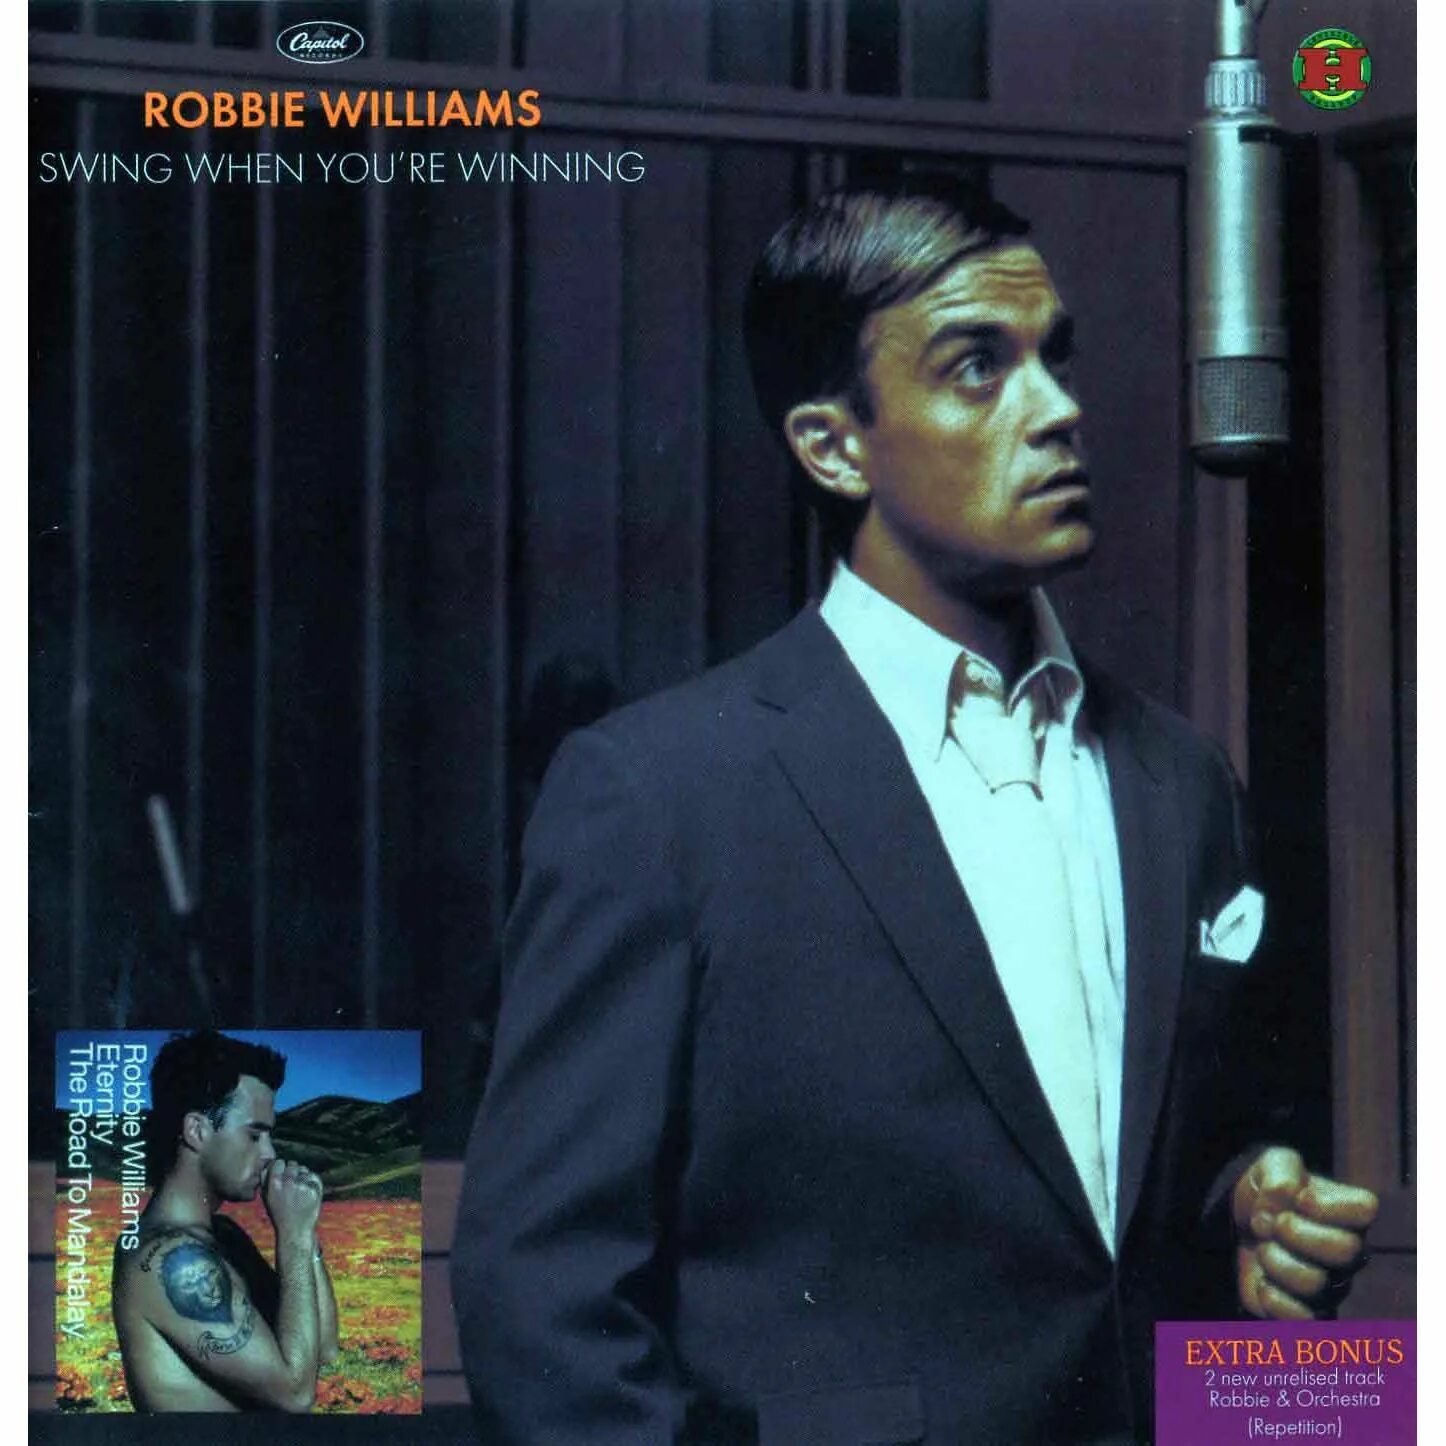 2001 Swing when you're winning. Robbie Williams 2001 Swing when you're winning. Робби Уильямс Supreme. Robbie Williams XXV Deluxe Edition. Robbie williams supreme перевод